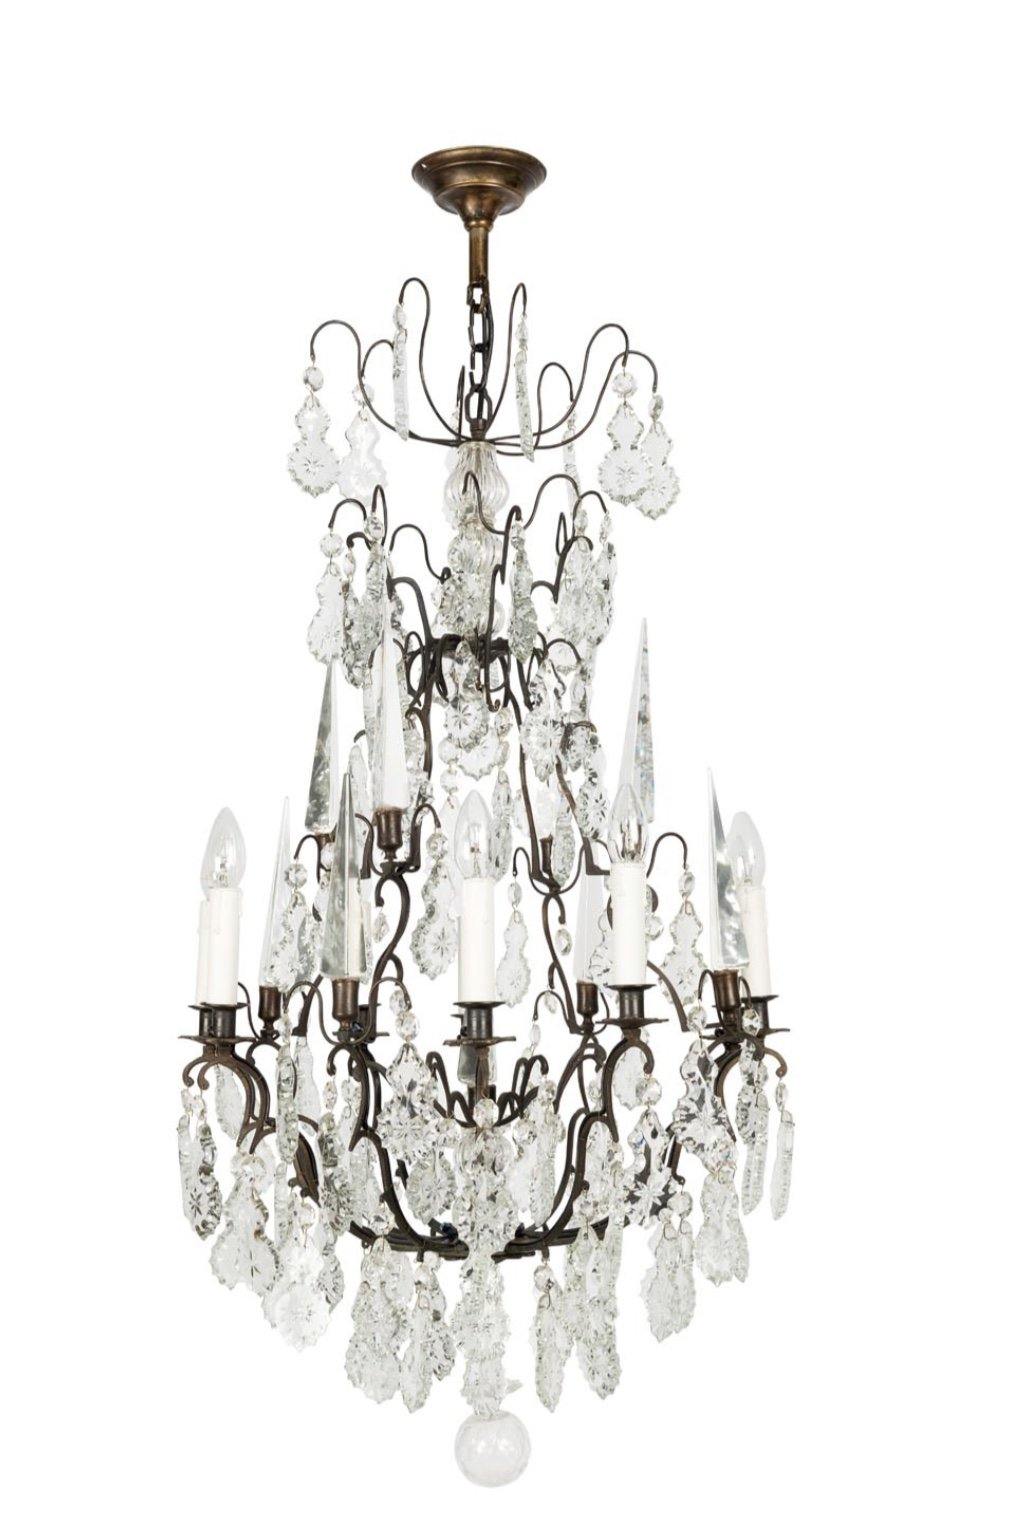 A FRENCH BRONZE AND CRYSTAL EIGHT LIGHT CHANDELIER, CIRCA 1920 - Fine Classic Antiques